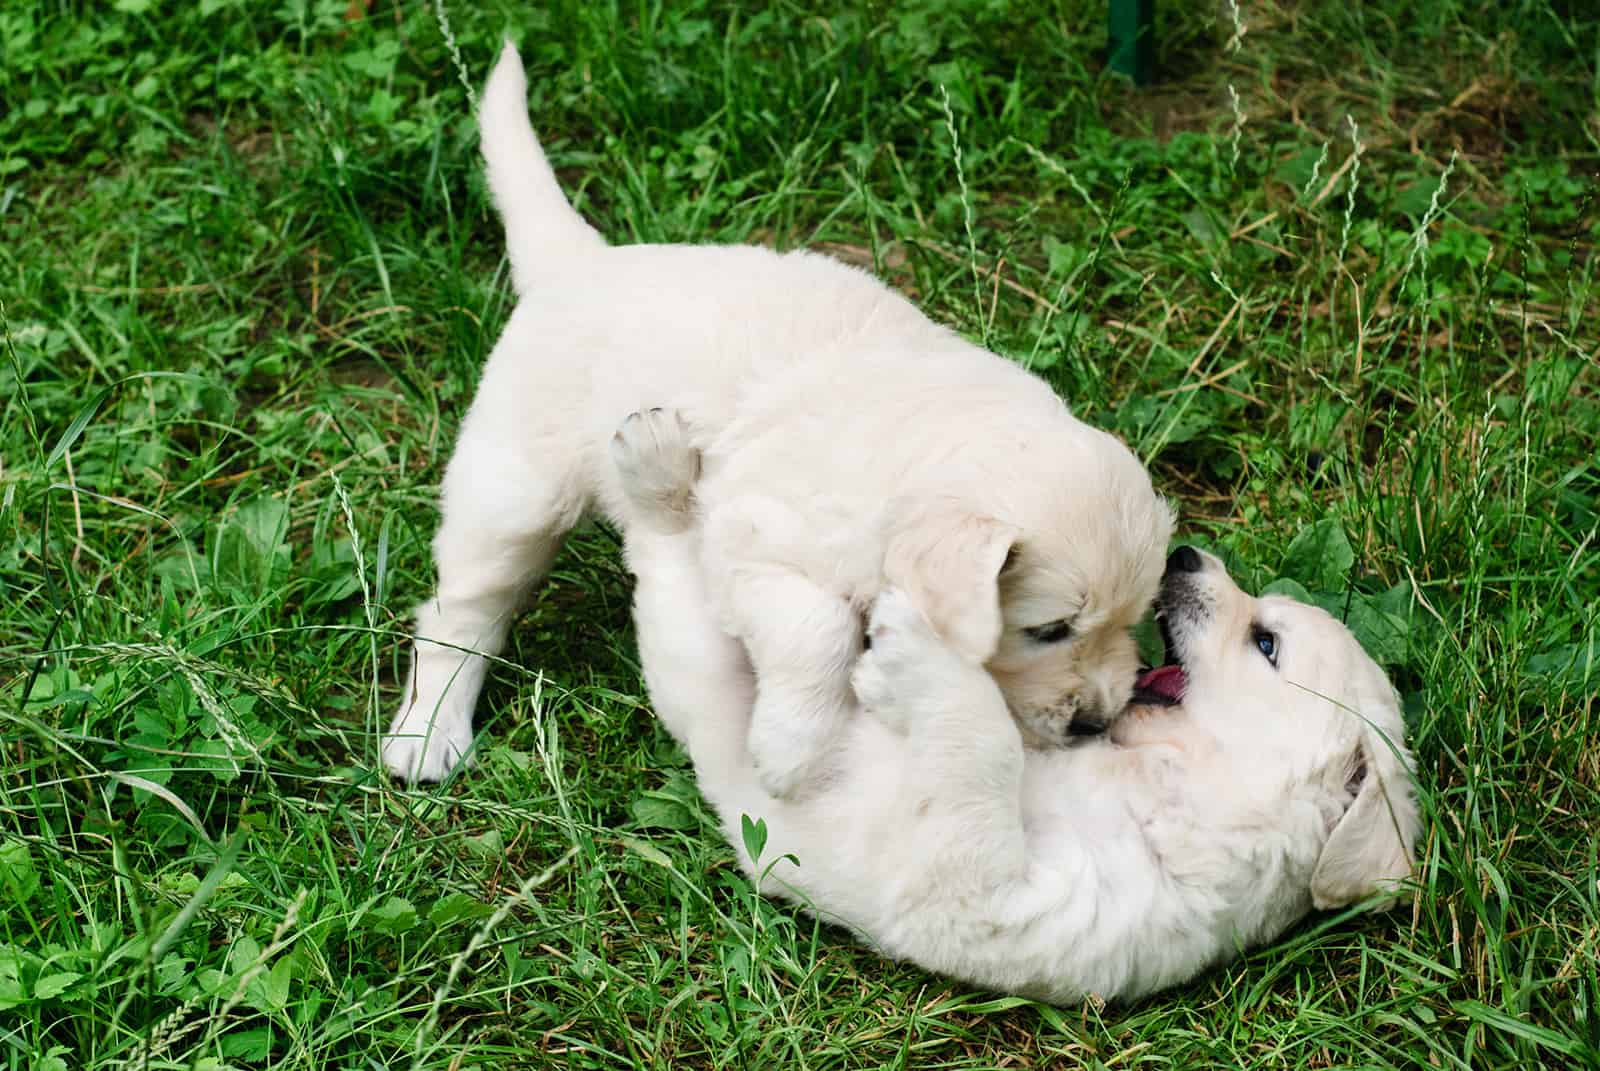 golden retriever puppies are playing in the grass